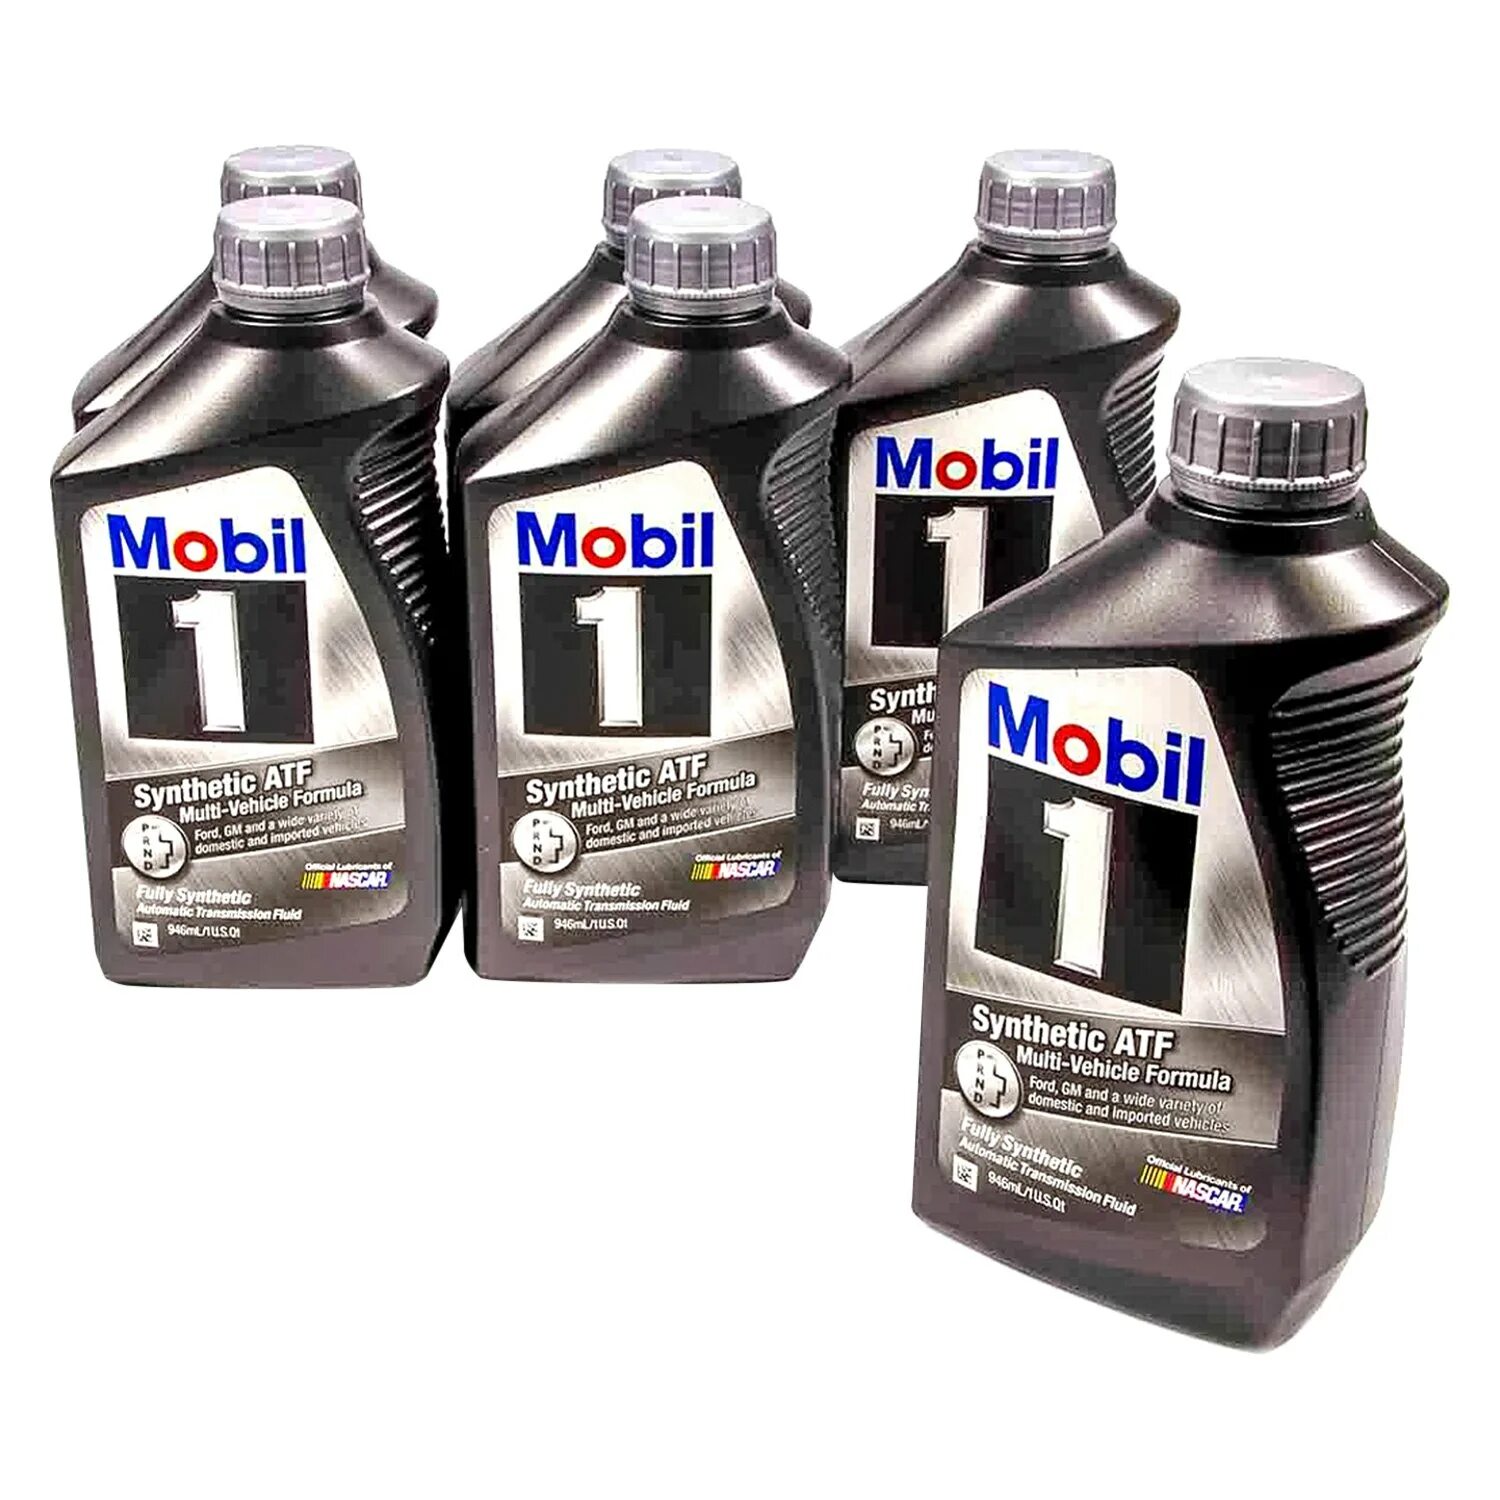 Mobil 1 Synthetic АТФ. Mobil 1 Full Synthetic ATF. Mobil 1 Synthetic ATF 152582. Mobil 380 ATF.